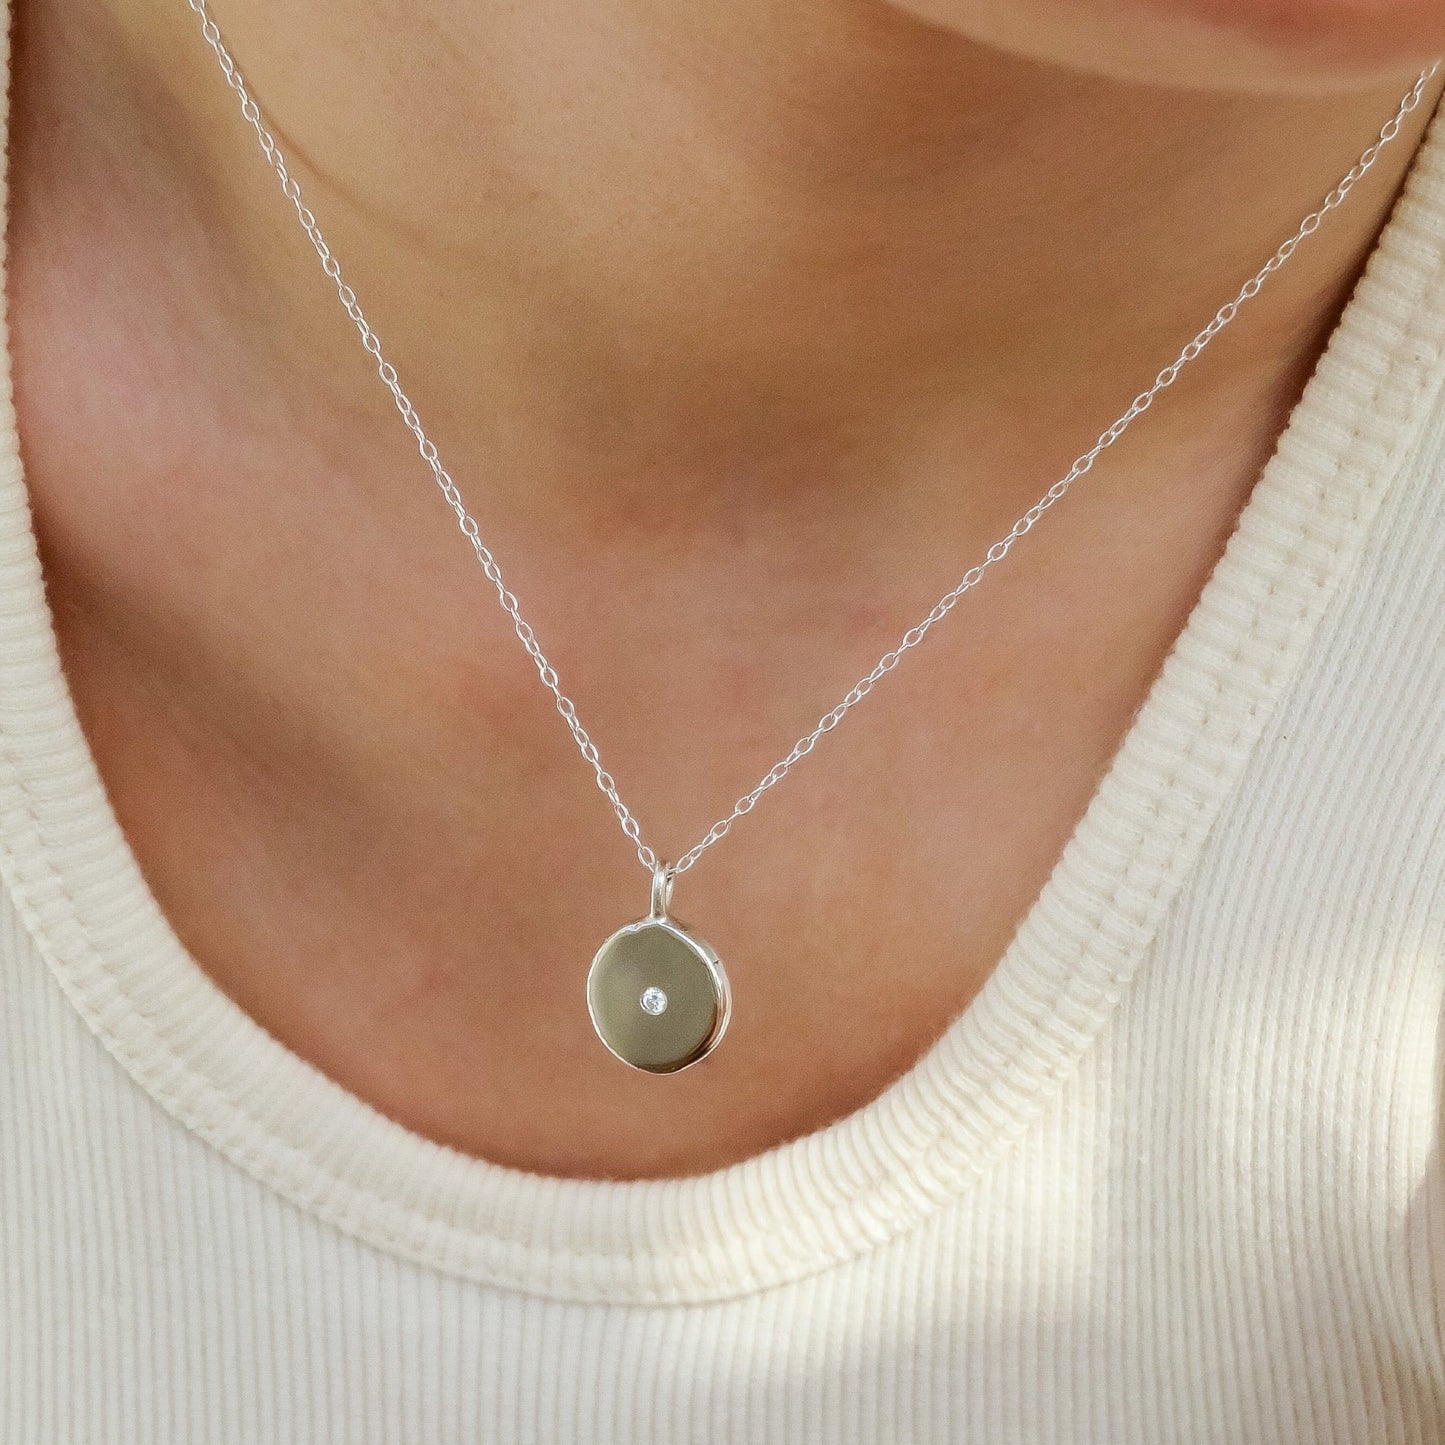 Nova Pendant Necklace in Silver & 9ct Gold (Available in your birthstone)